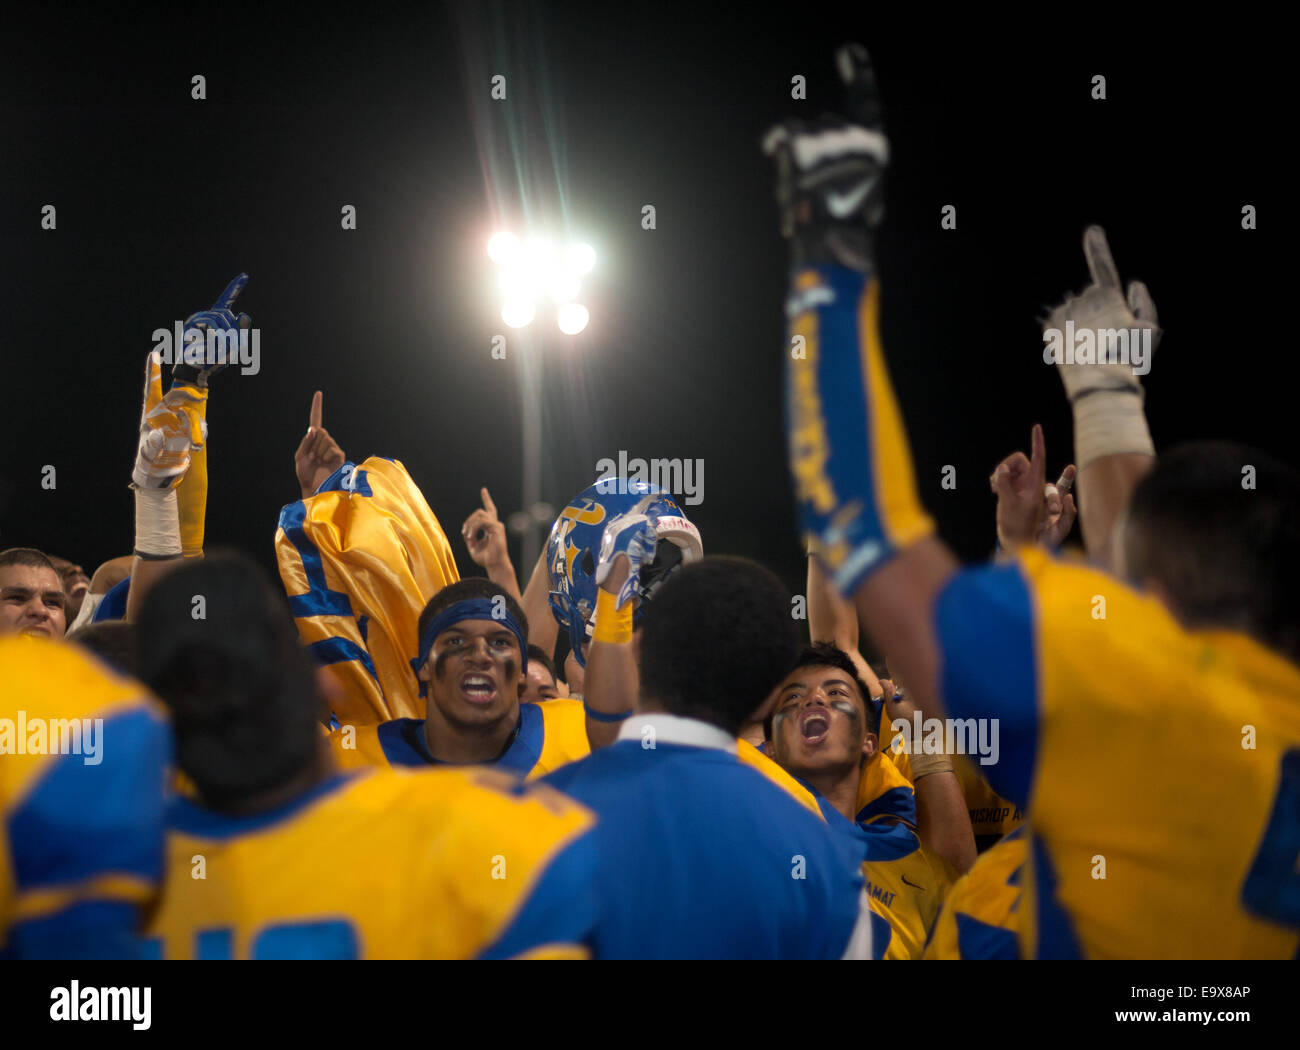 October 4, 2014, La Puente, CA.Gardena Serra cavaliers celebrating after the Bishop Amat upset of the Cavaliers at Bishop Amat high school on October 3, 2014. The Cavaliers who are usually a nationally ranked high school football team, were upset by Bishop Amat 14 - 7. (Mandatory Credit: Ed Ruvalcaba/MarinMedia.org) (Complete photographer, and company credit required) Stock Photo